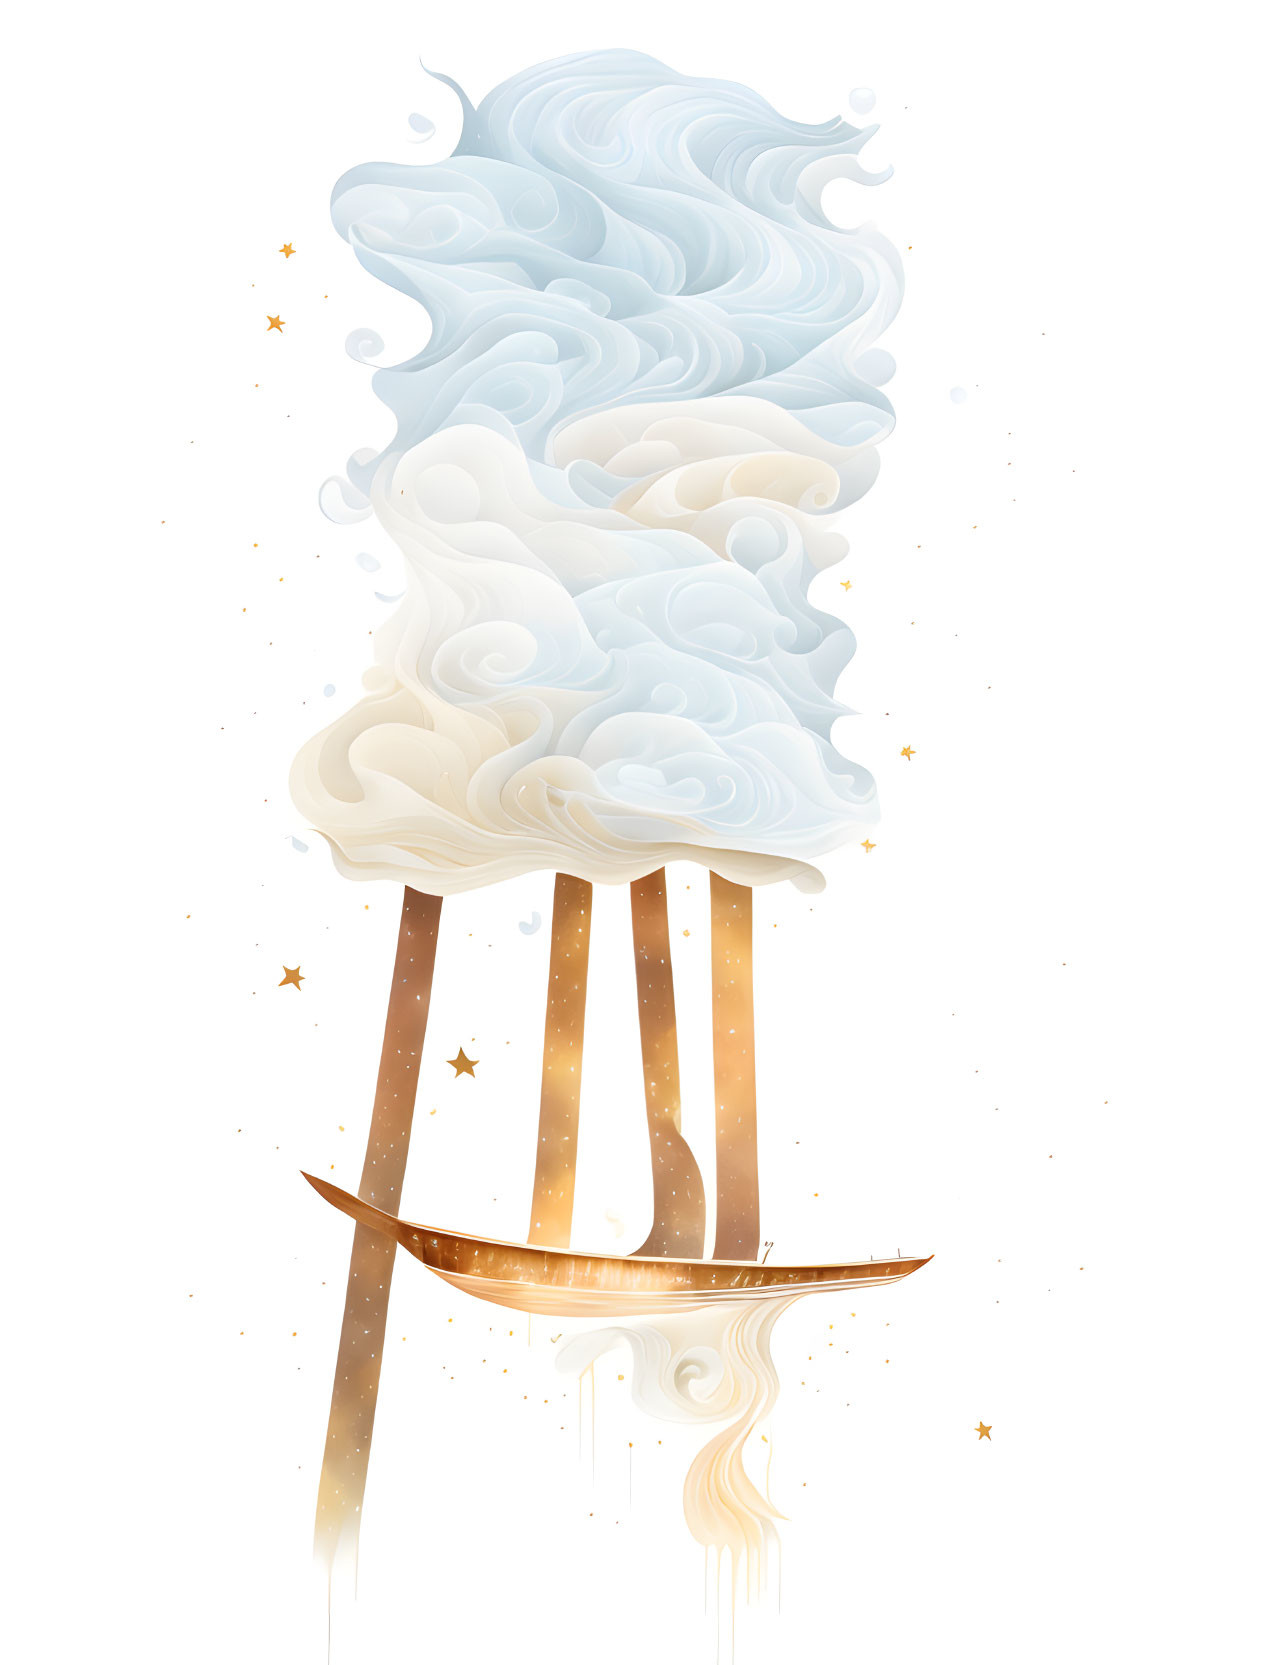 Illustration of walking umbrella with swirling clouds and sparkling stars